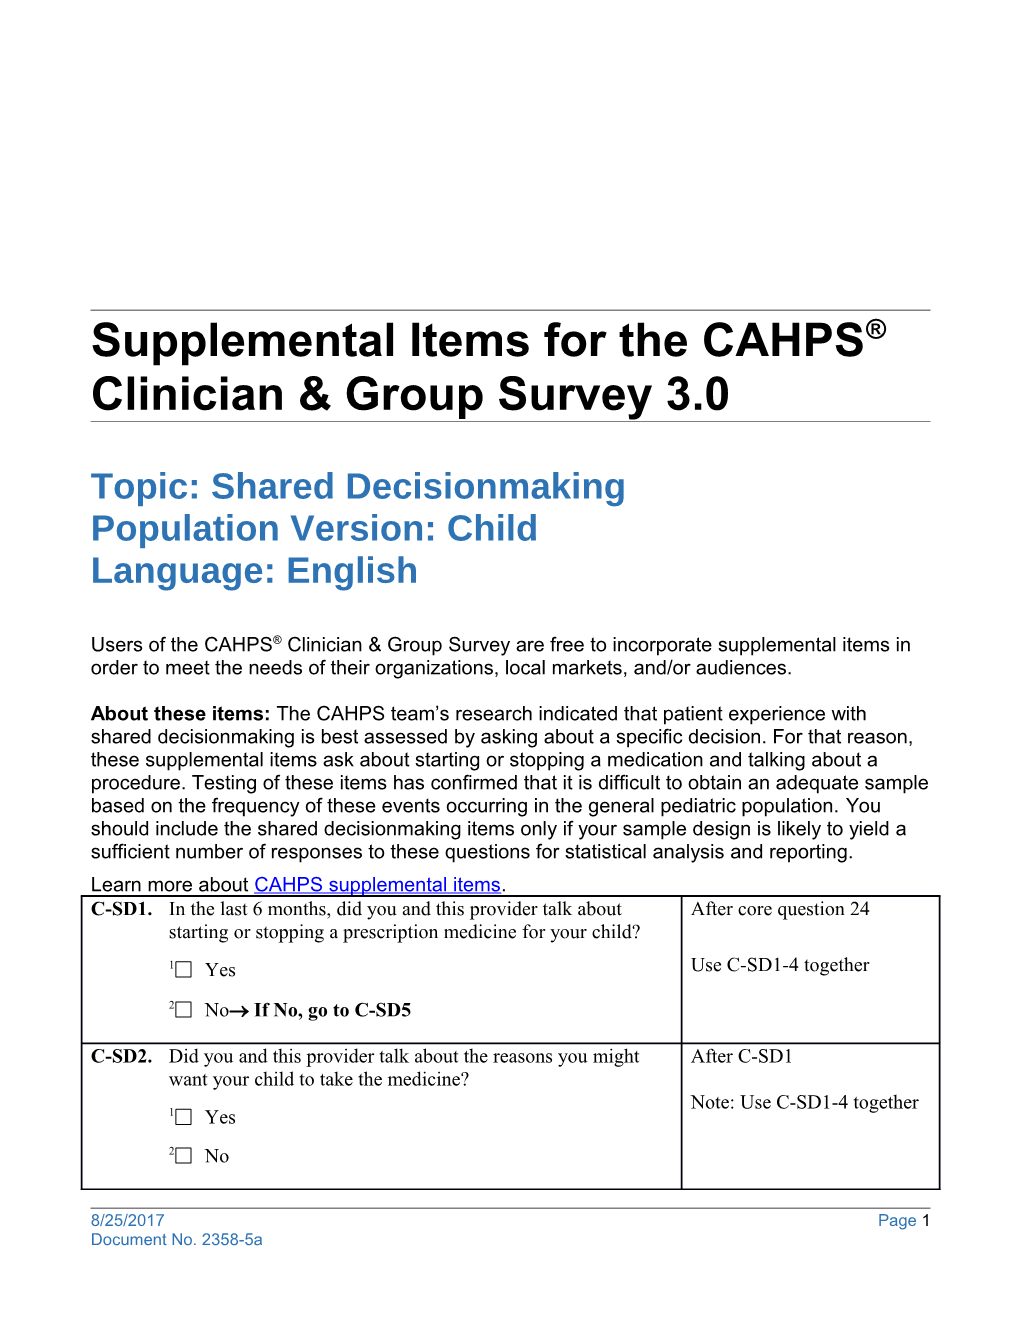 CAHPS Clinician & Group Survey 3.0Supplemental Items: Shared Decisionmaking